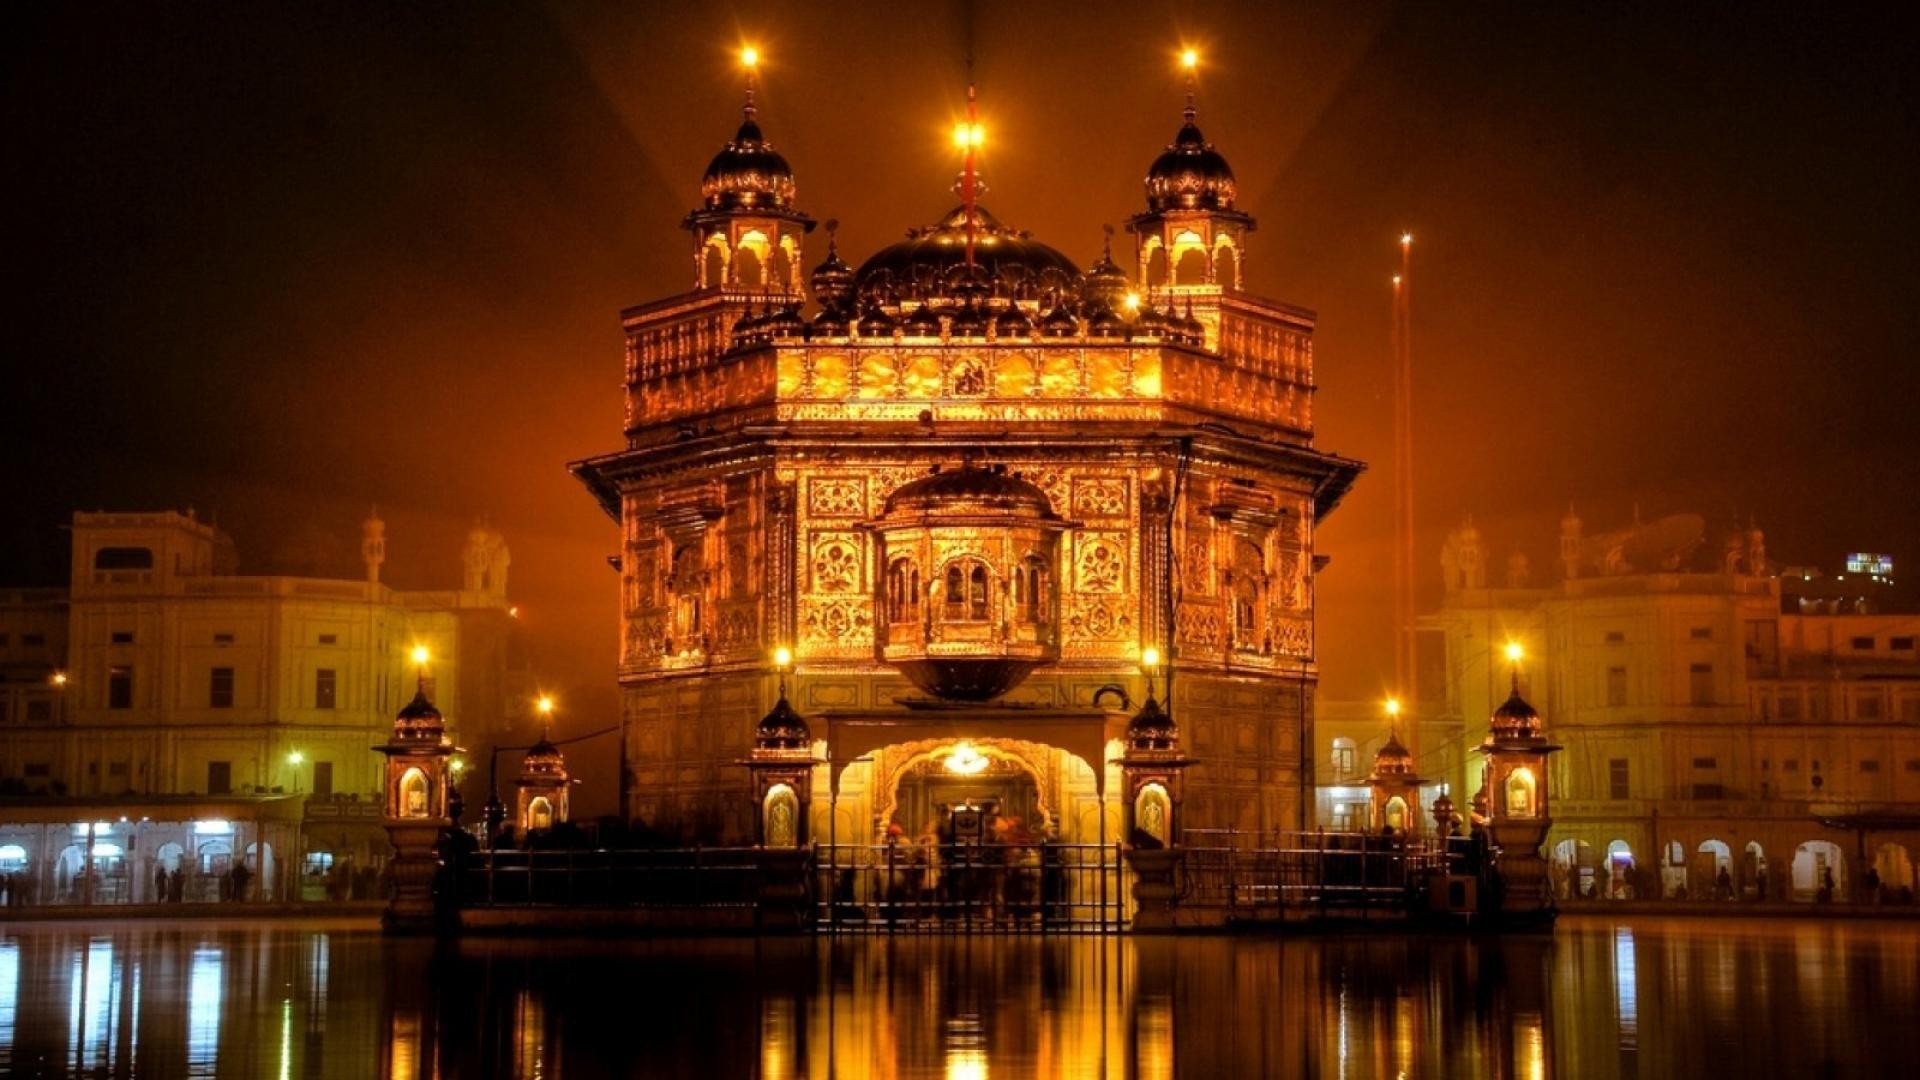 1920x1080 The golden temple at night in amritsar india wallpaper